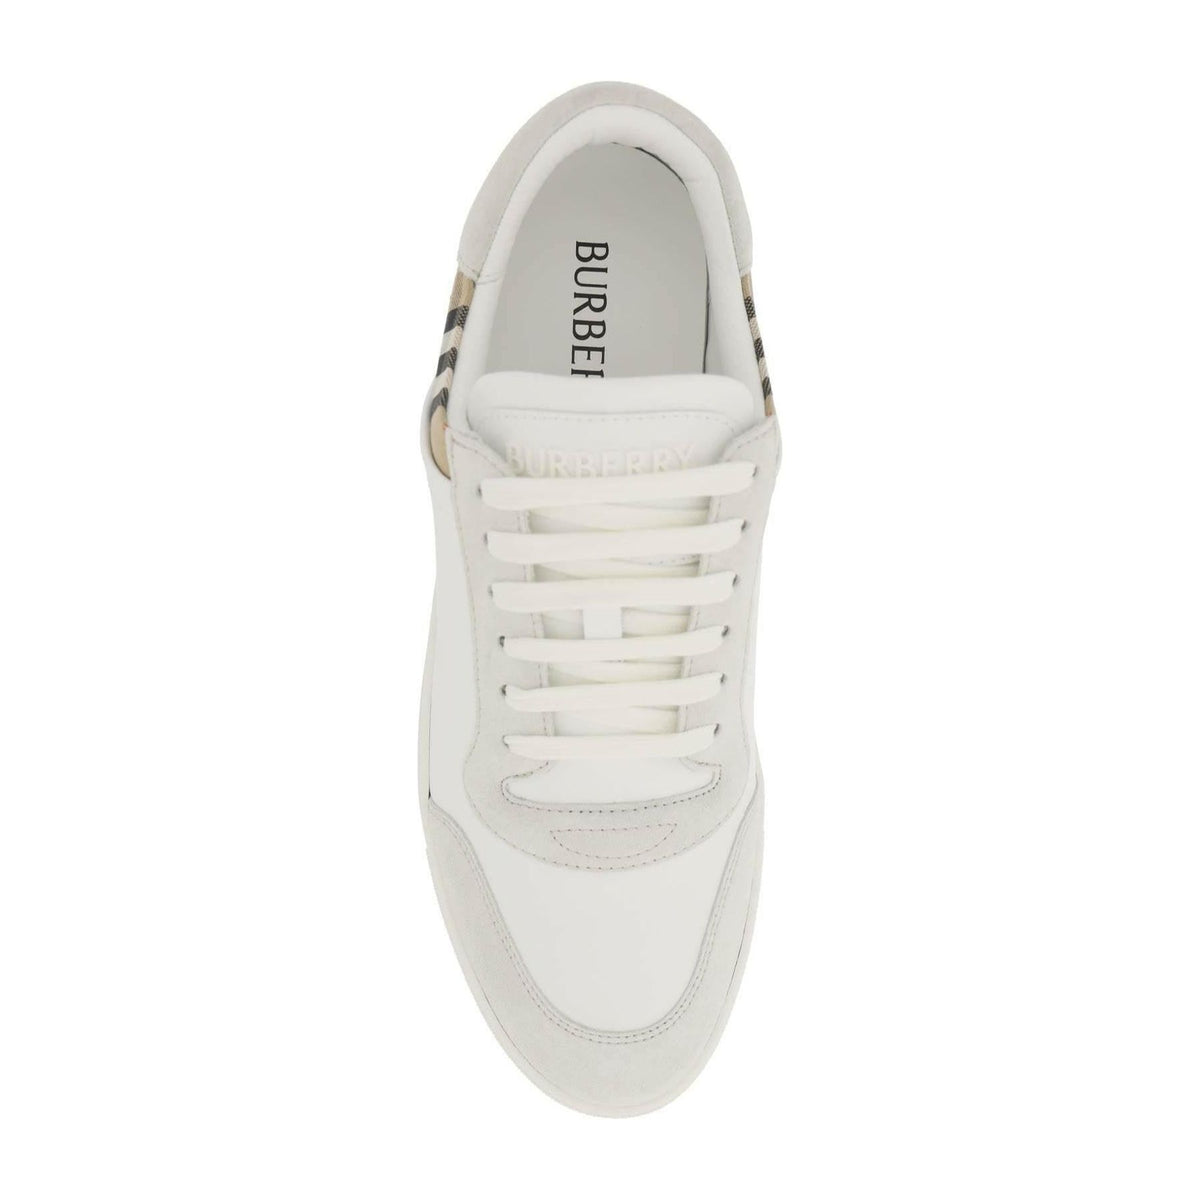 BURBERRY - White And Archive Beige Check Leather Sneakers - JOHN JULIA